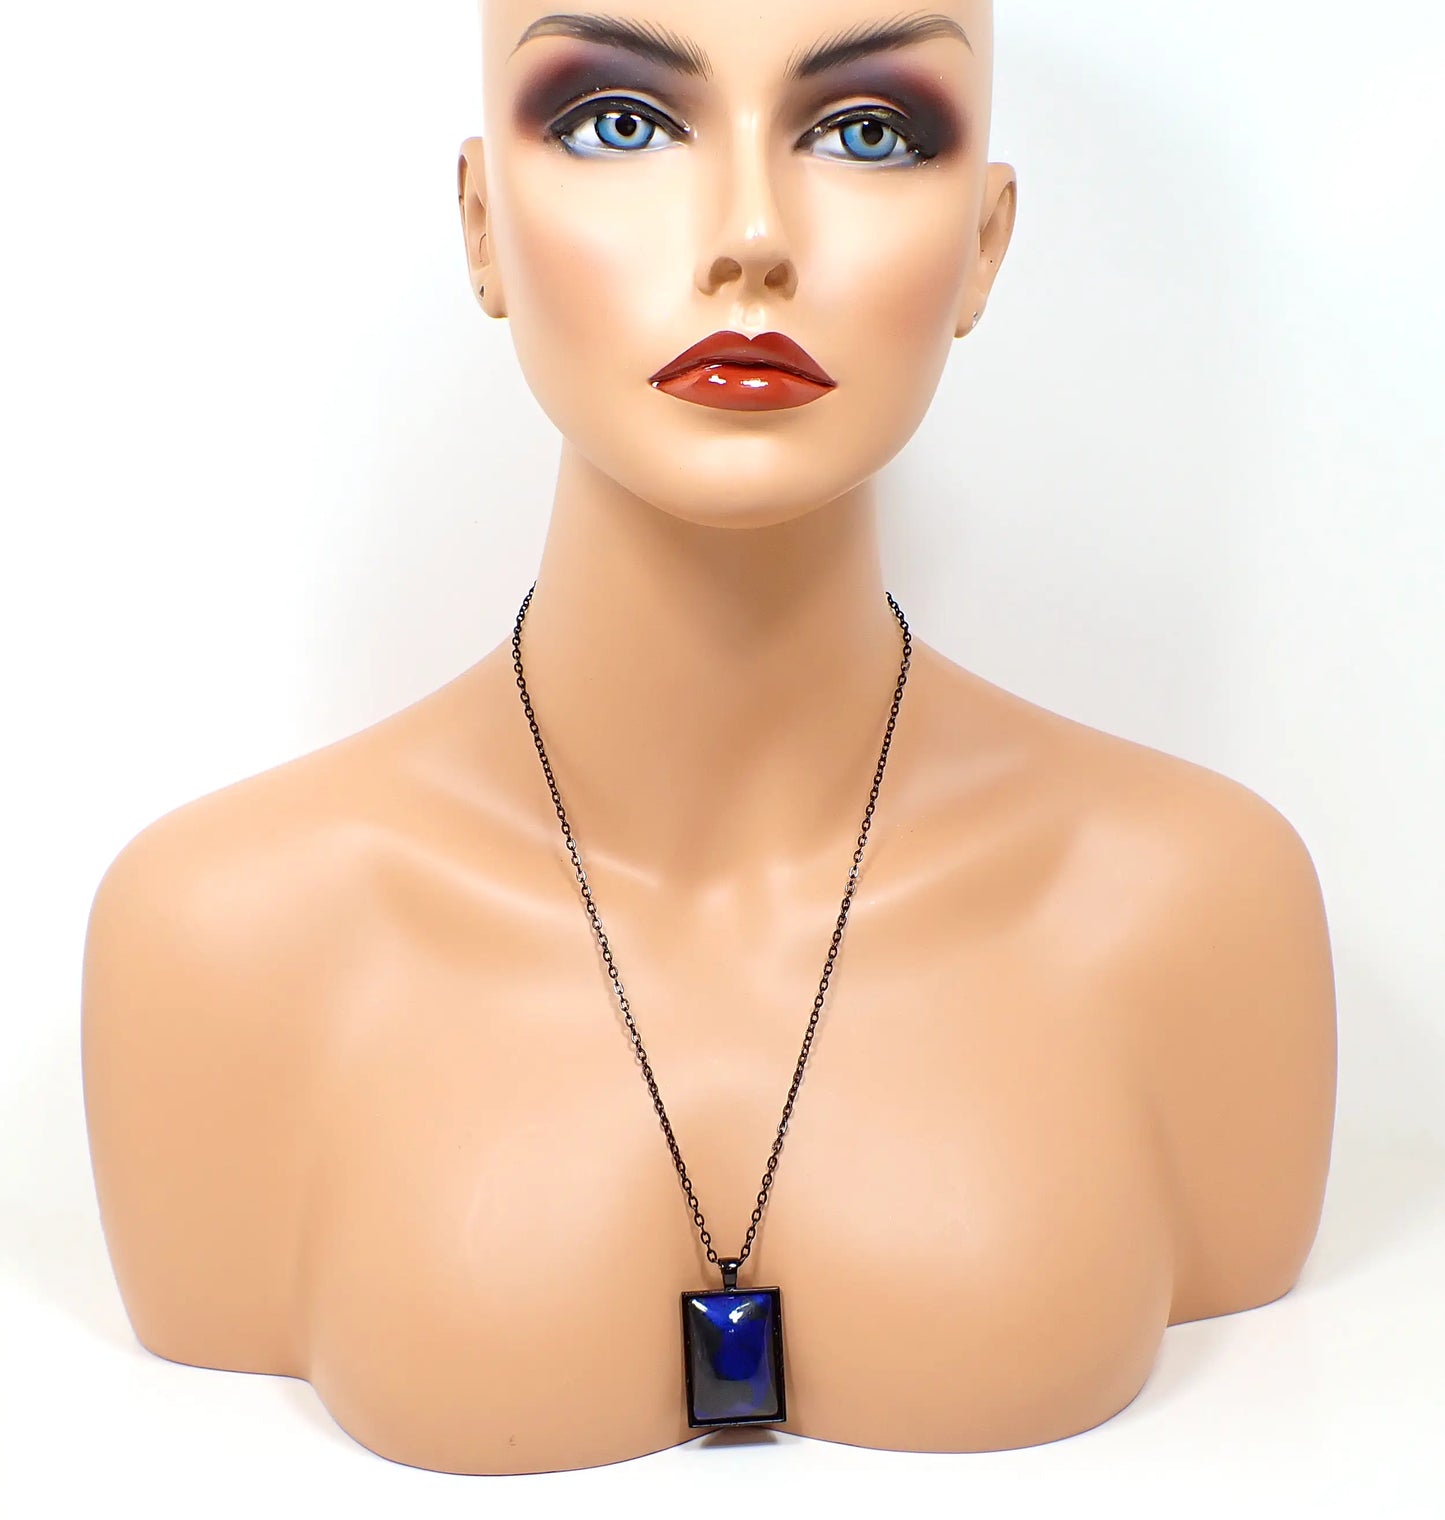 Large Goth Handmade Cobalt Blue and Black Resin Rectangle Pendant Necklace